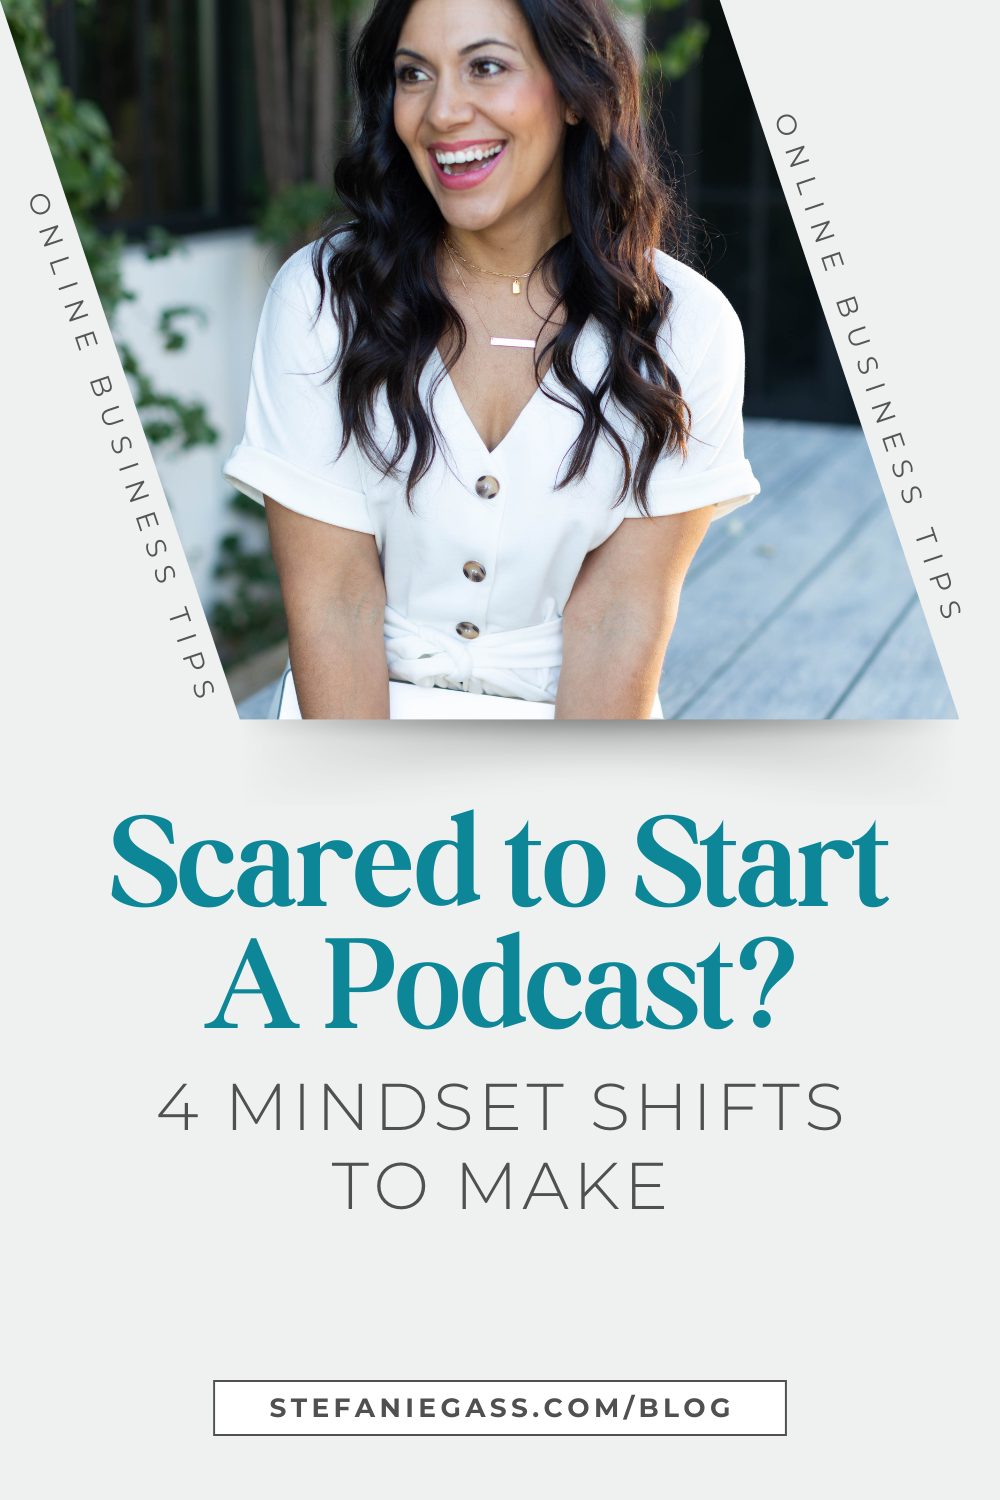 Brown haired woman smiling, holding laptop, wearing white. Text says: Scared to start a podcast? 4 mindset shifts to make